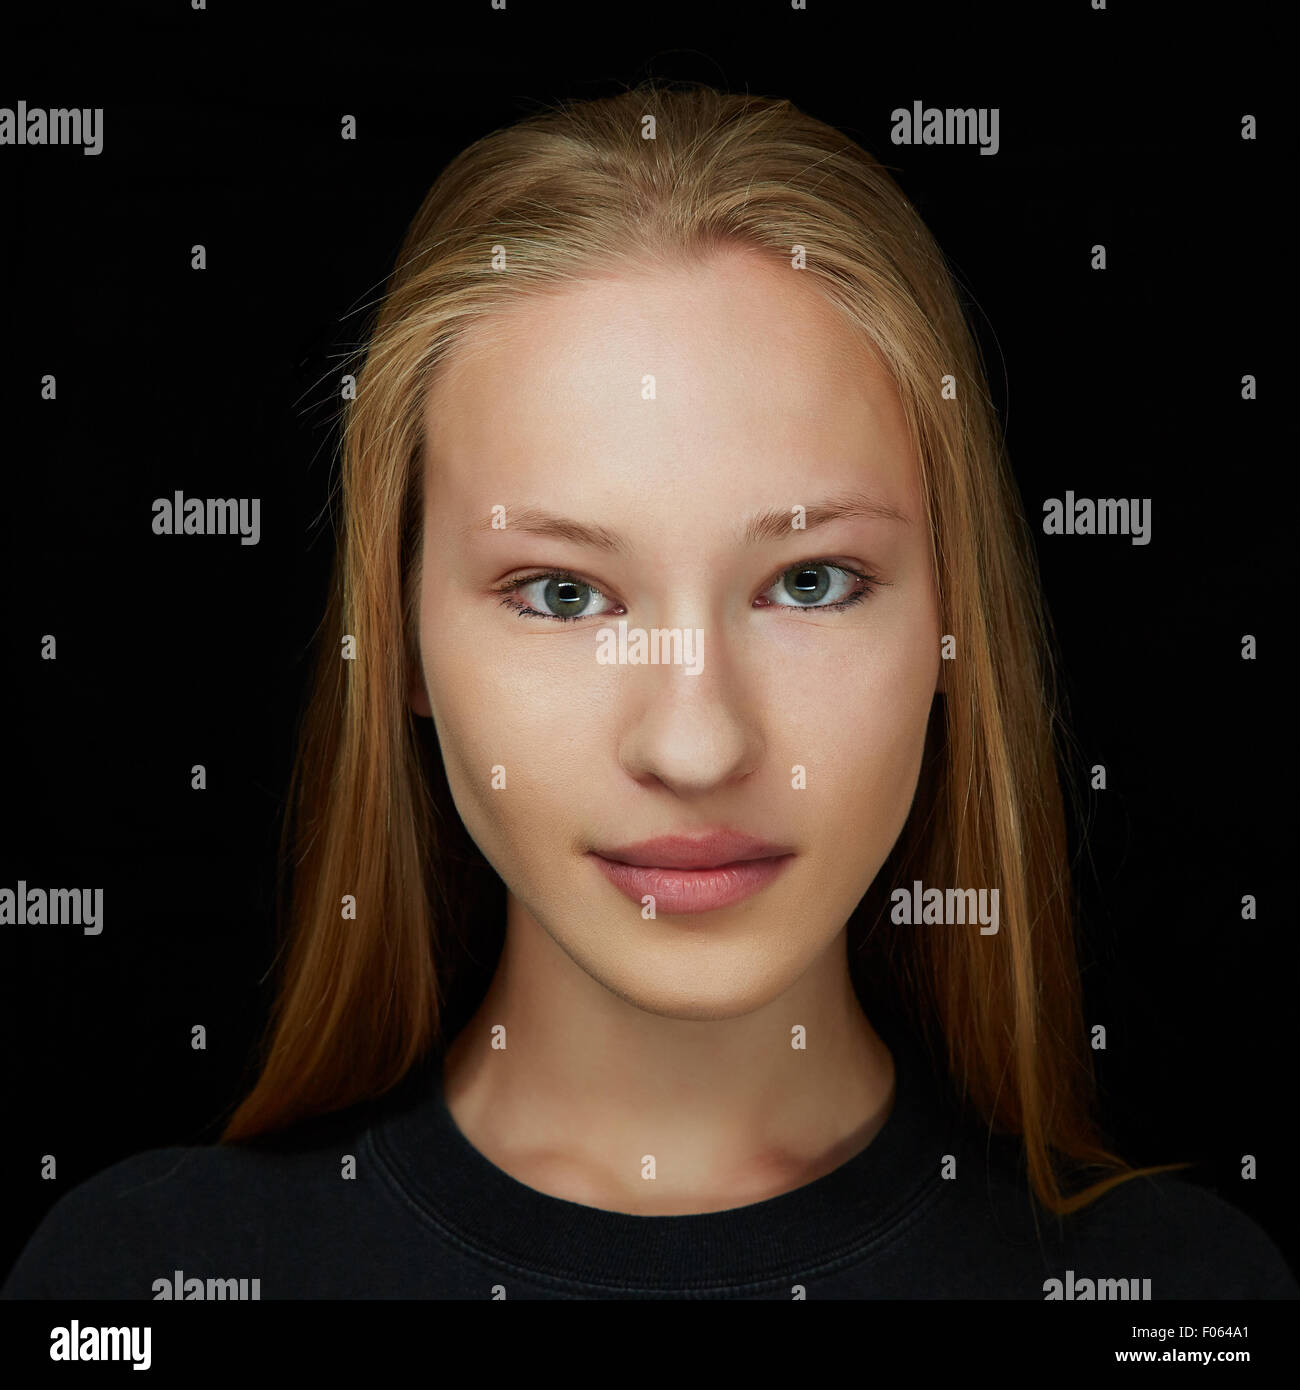 Face of a young attractive blonde woman in front view on dark background Stock Photo